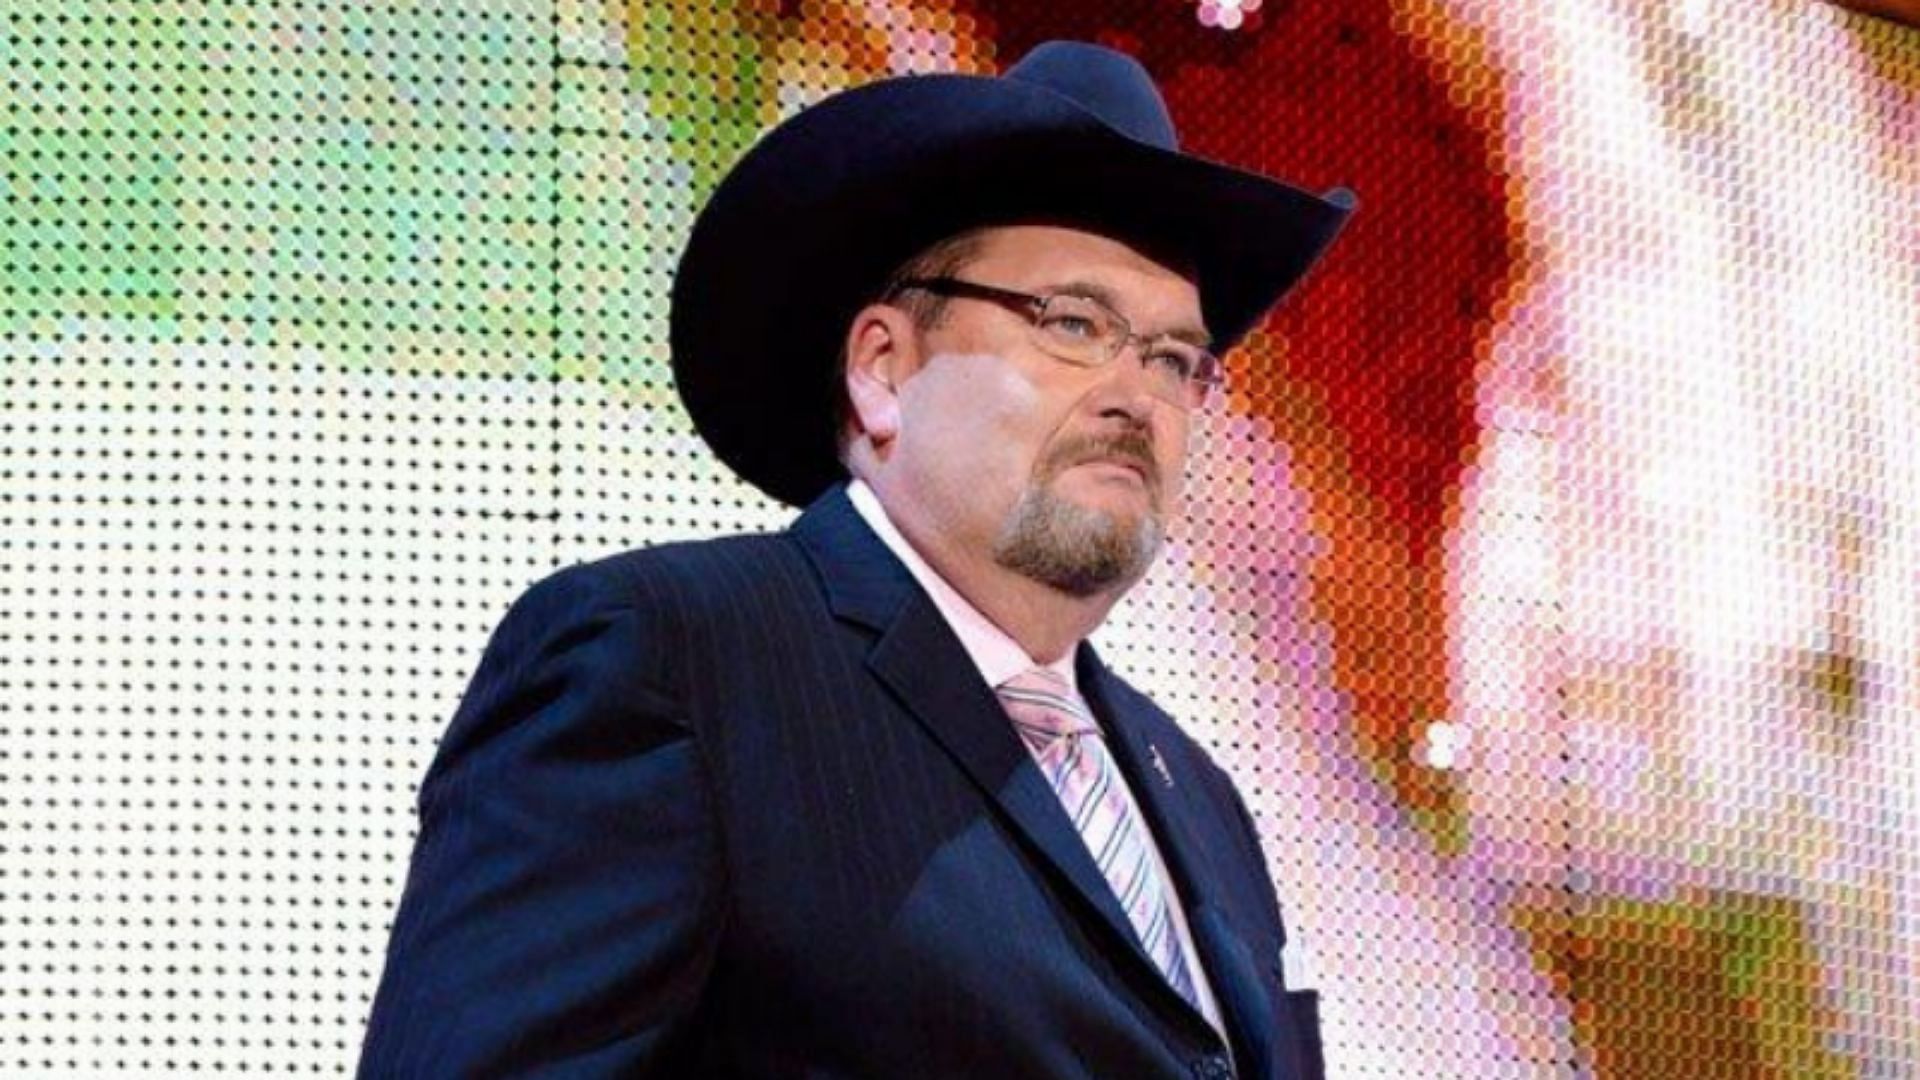 Former WWE commentator and executive Jim Ross